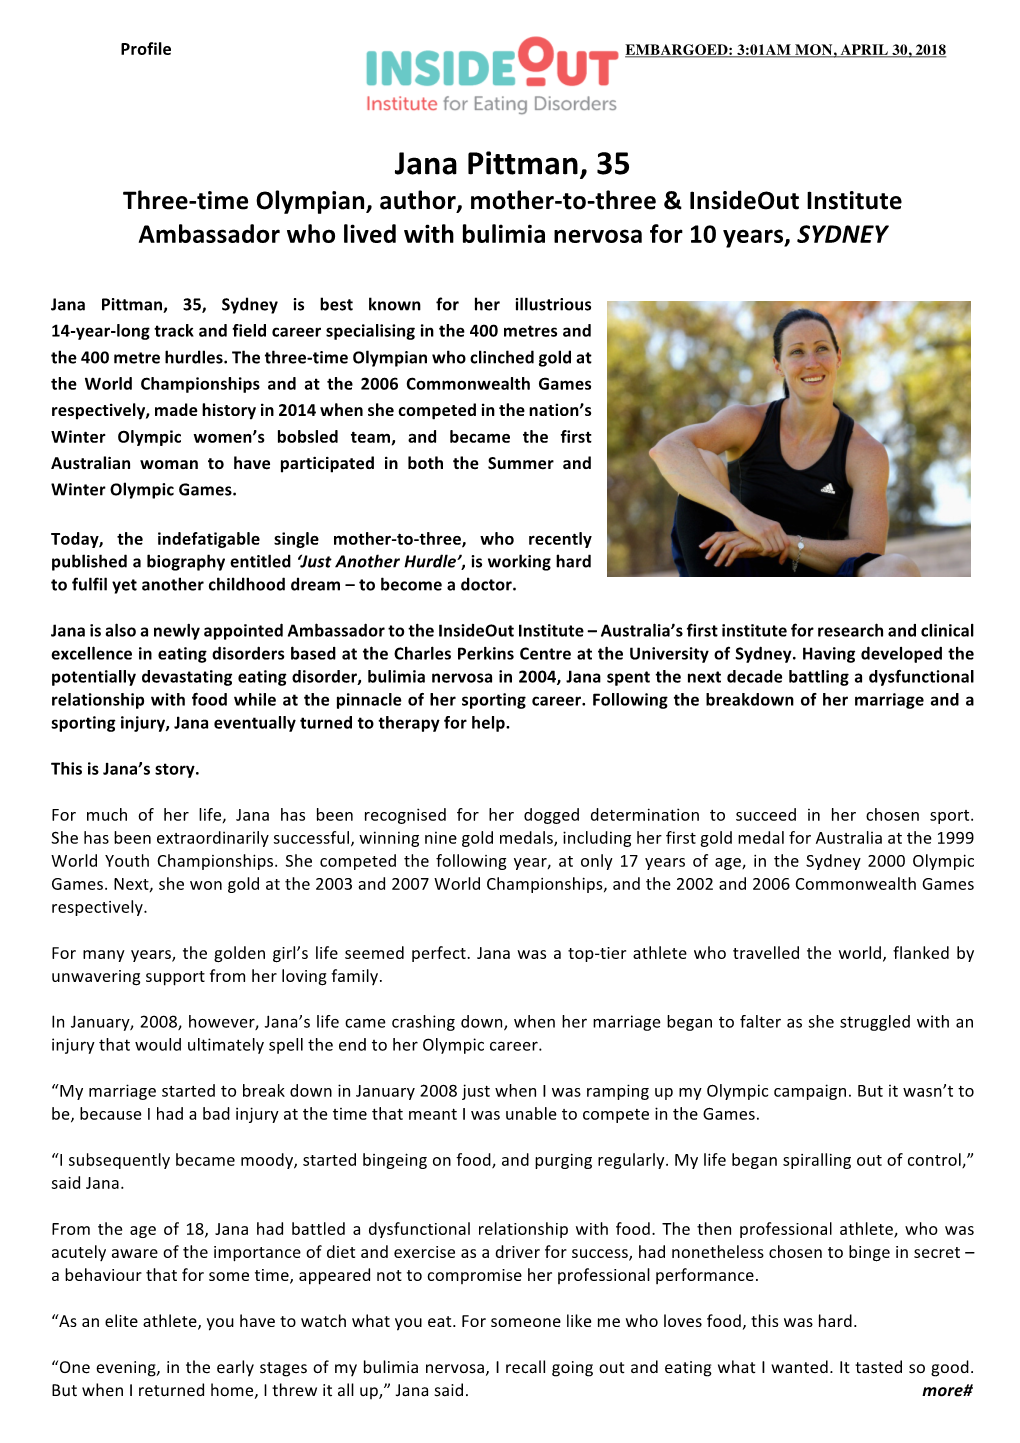 Jana Pittman, 35 Three-Time Olympian, Author, Mother-To-Three & Insideout Institute Ambassador Who Lived with Bulimia Nervosa for 10 Years, SYDNEY